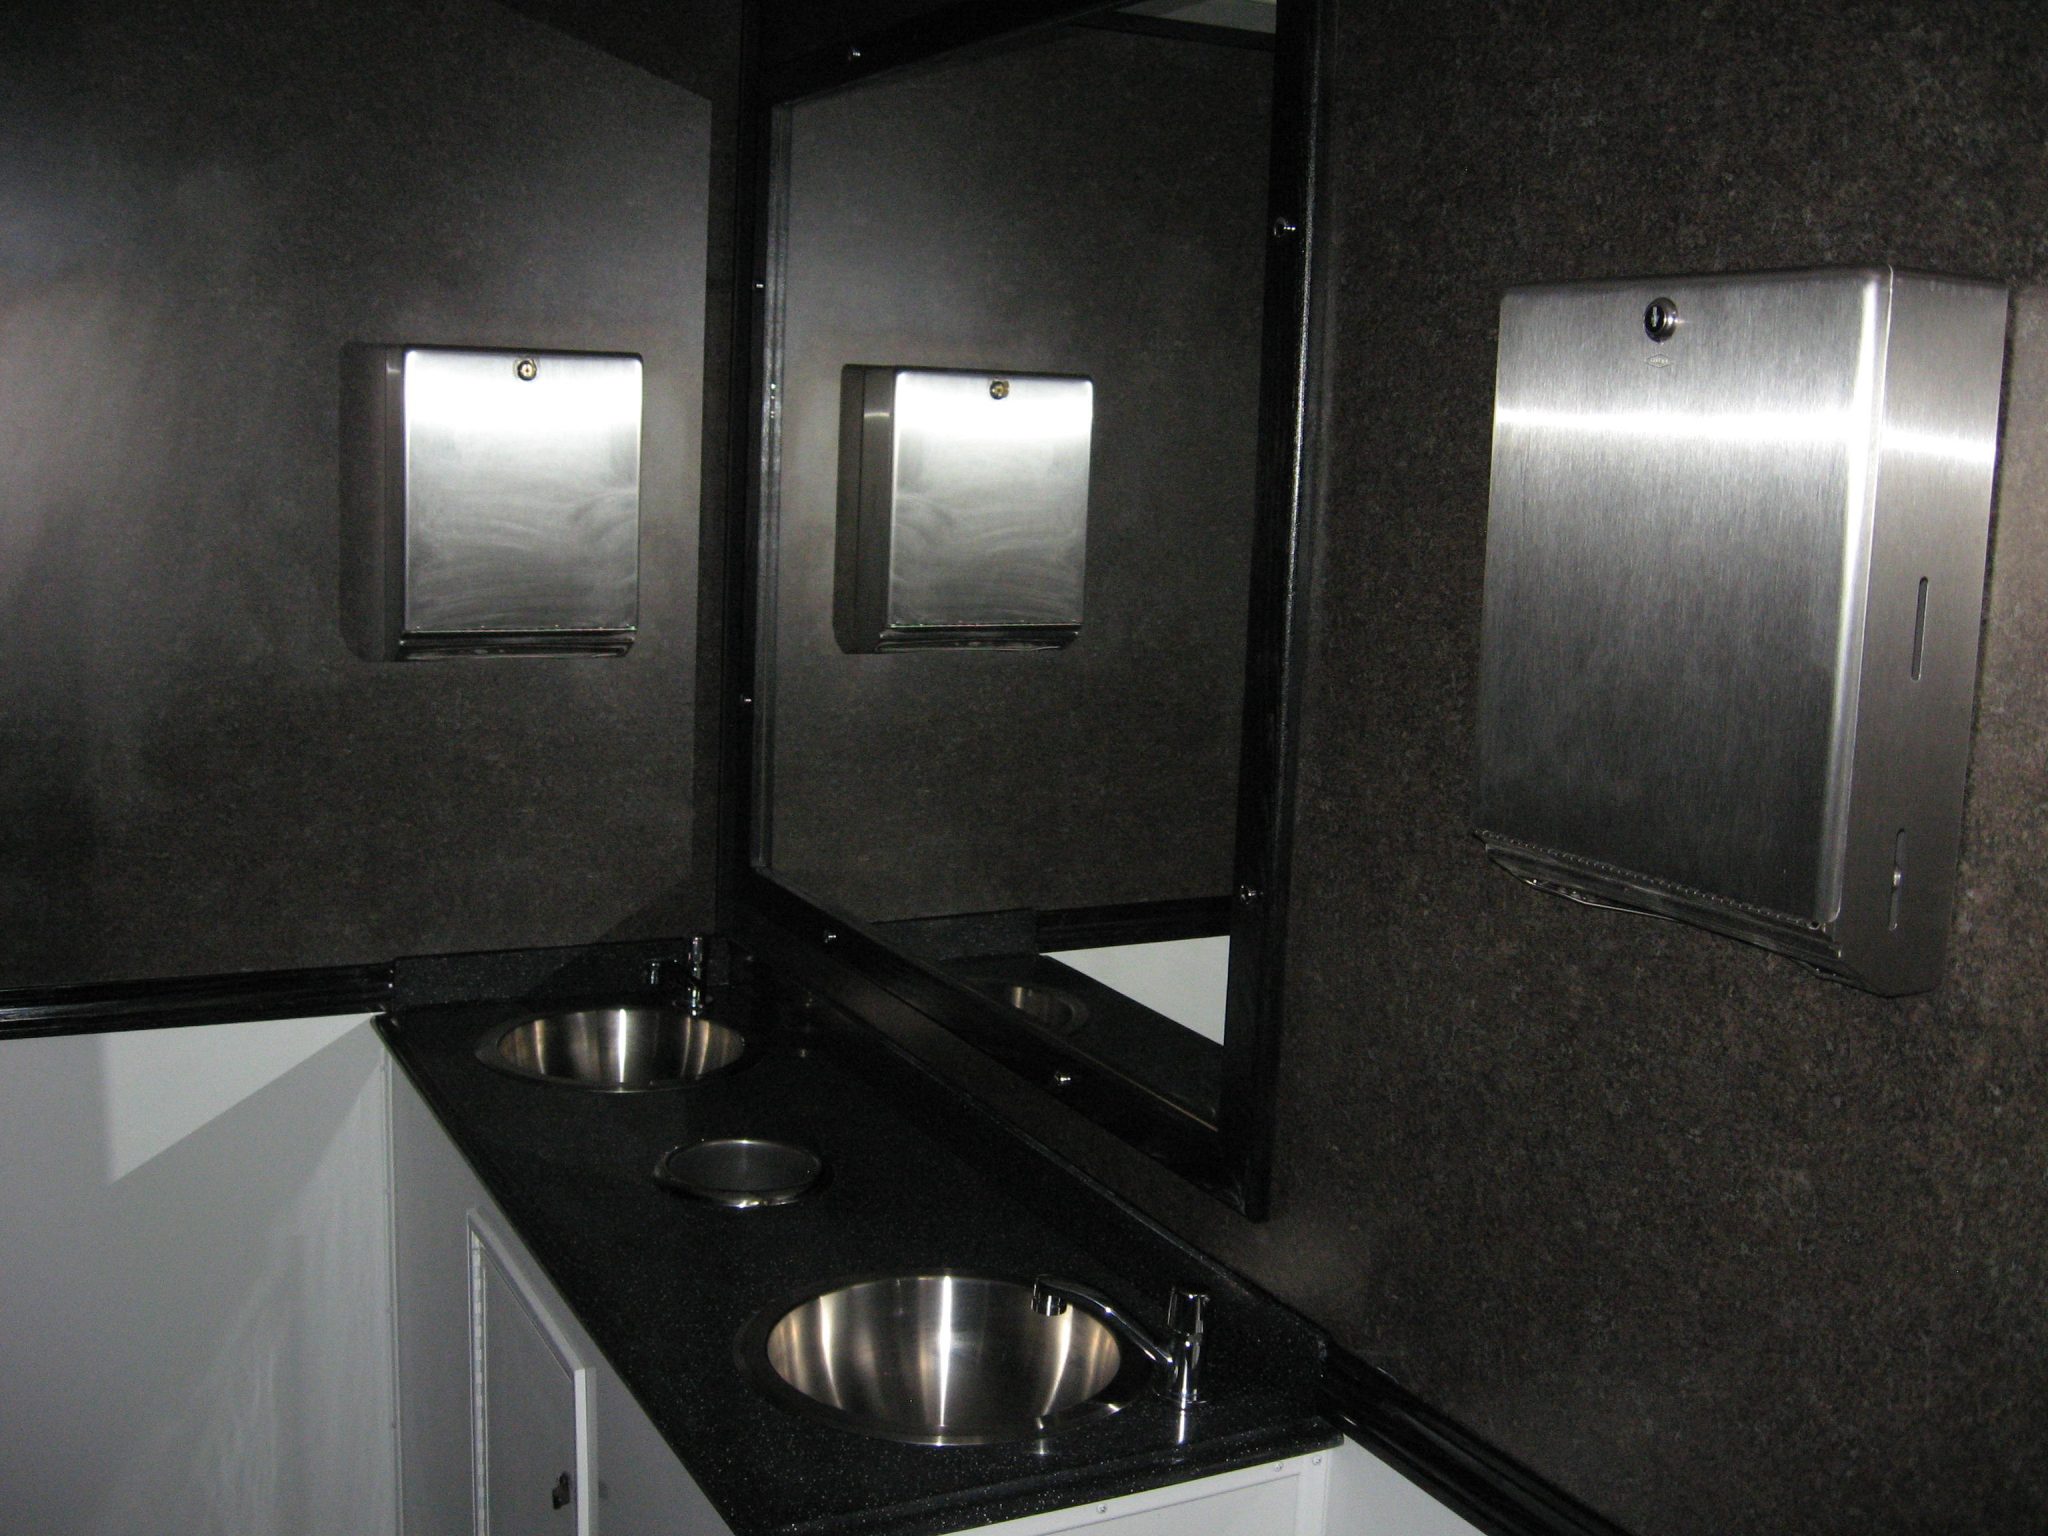 Double sinks provide ample room for cleaning up after using the facilities.